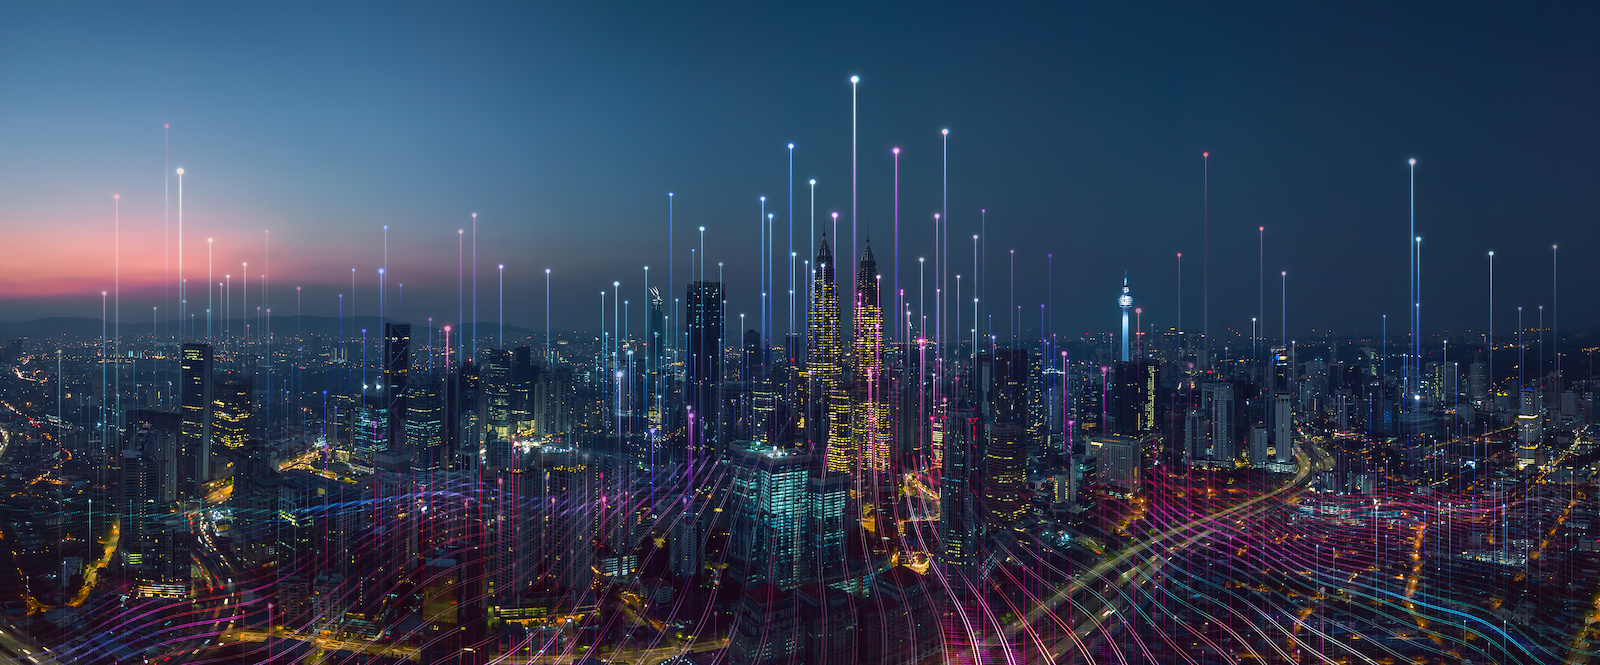 big data connection technology superimposed over a city landscape